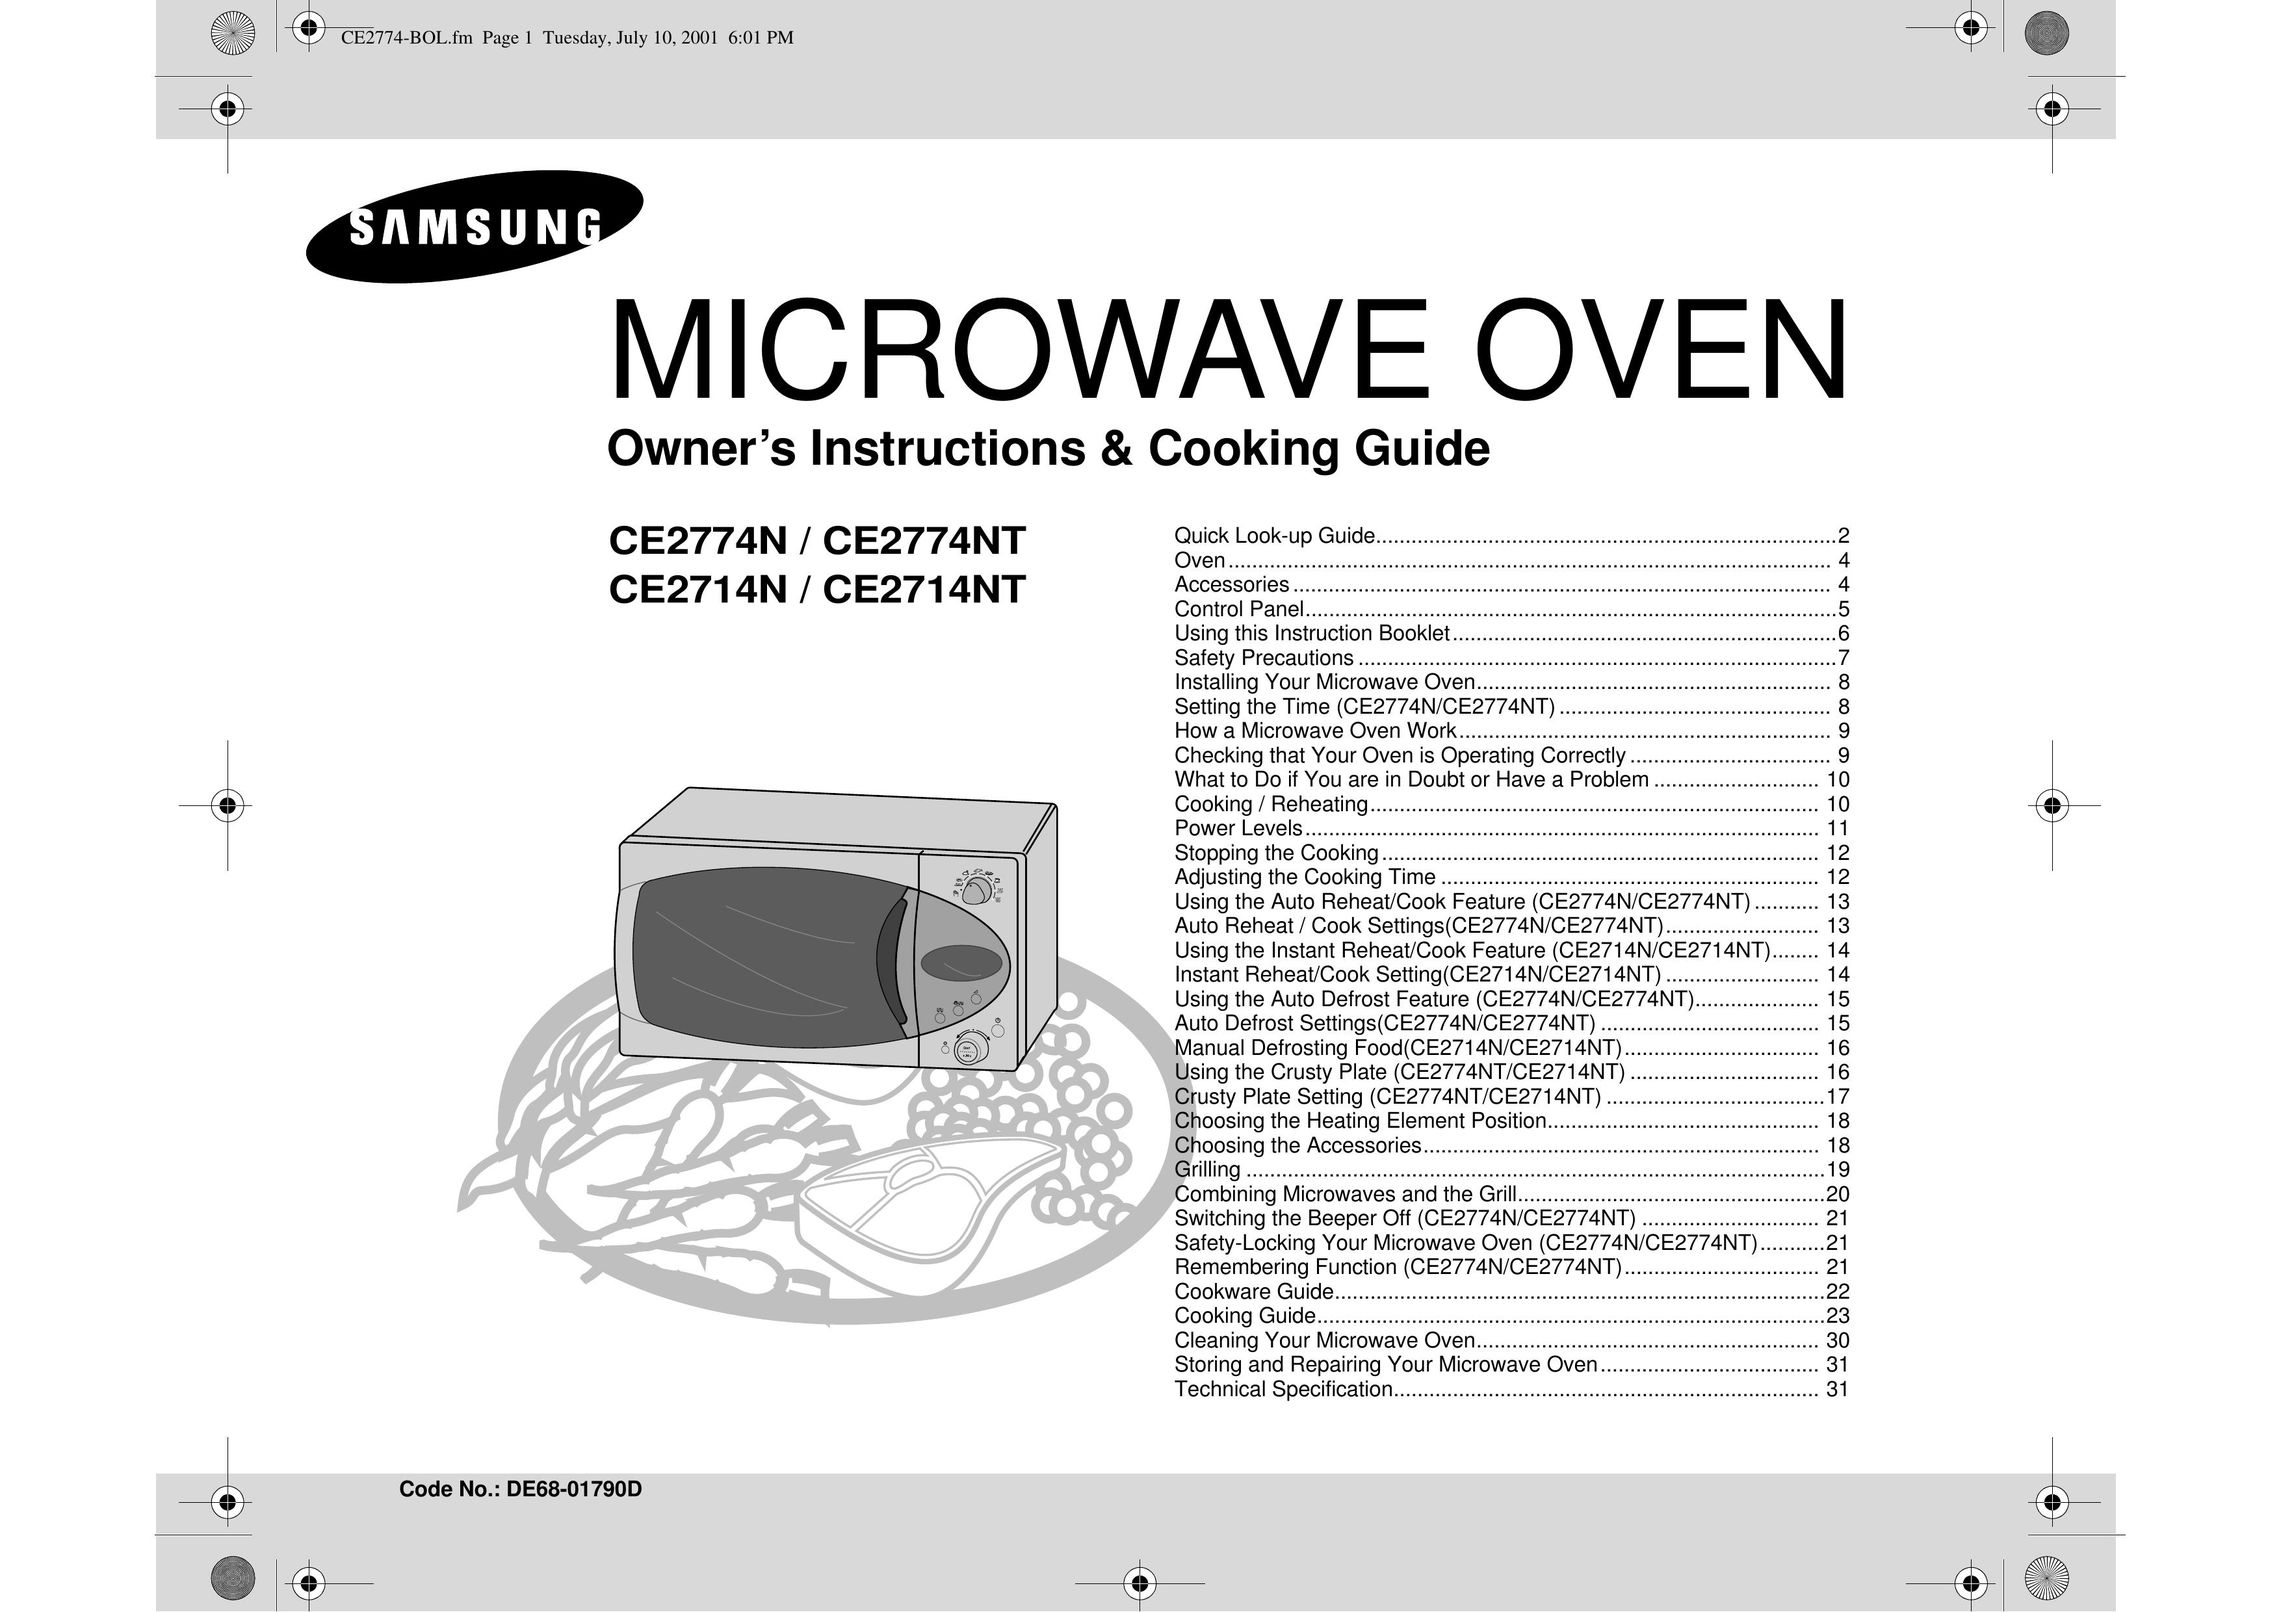 Samsung CE2714NT Microwave Oven User Manual